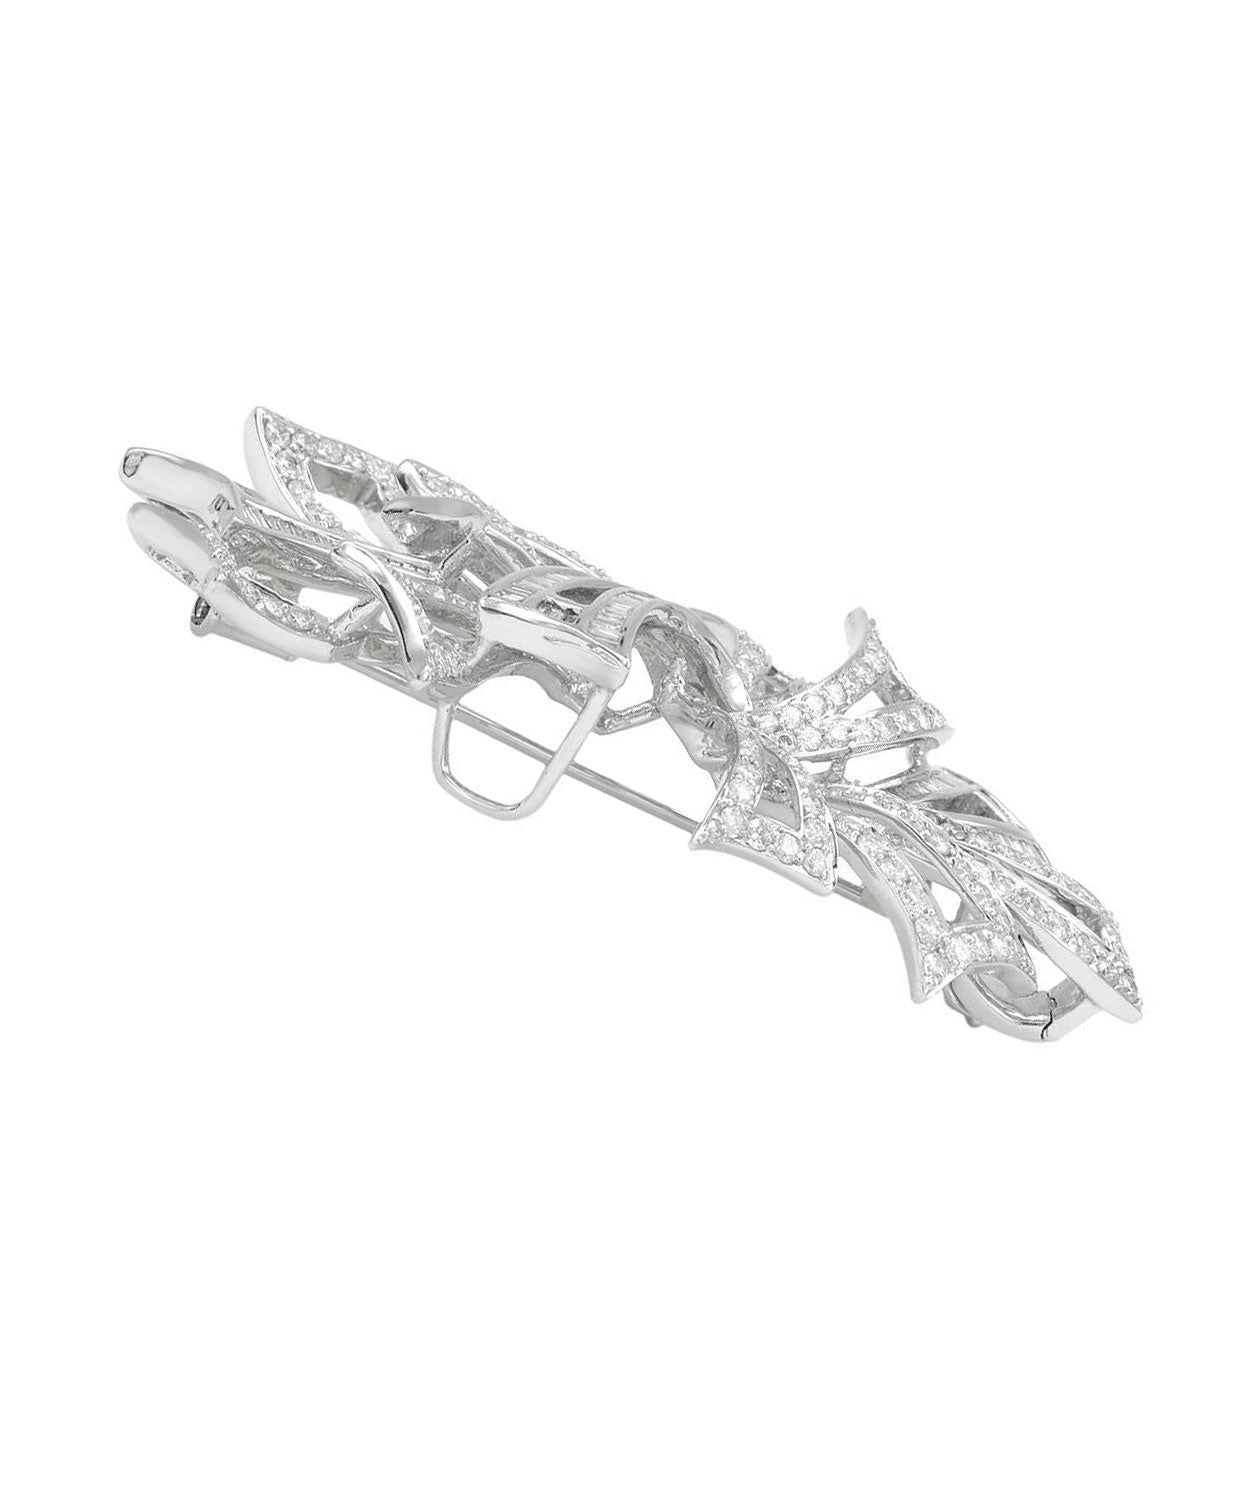 Allure Collection 5.07 ctw Diamond 18k White Gold Statement Brooch View 3